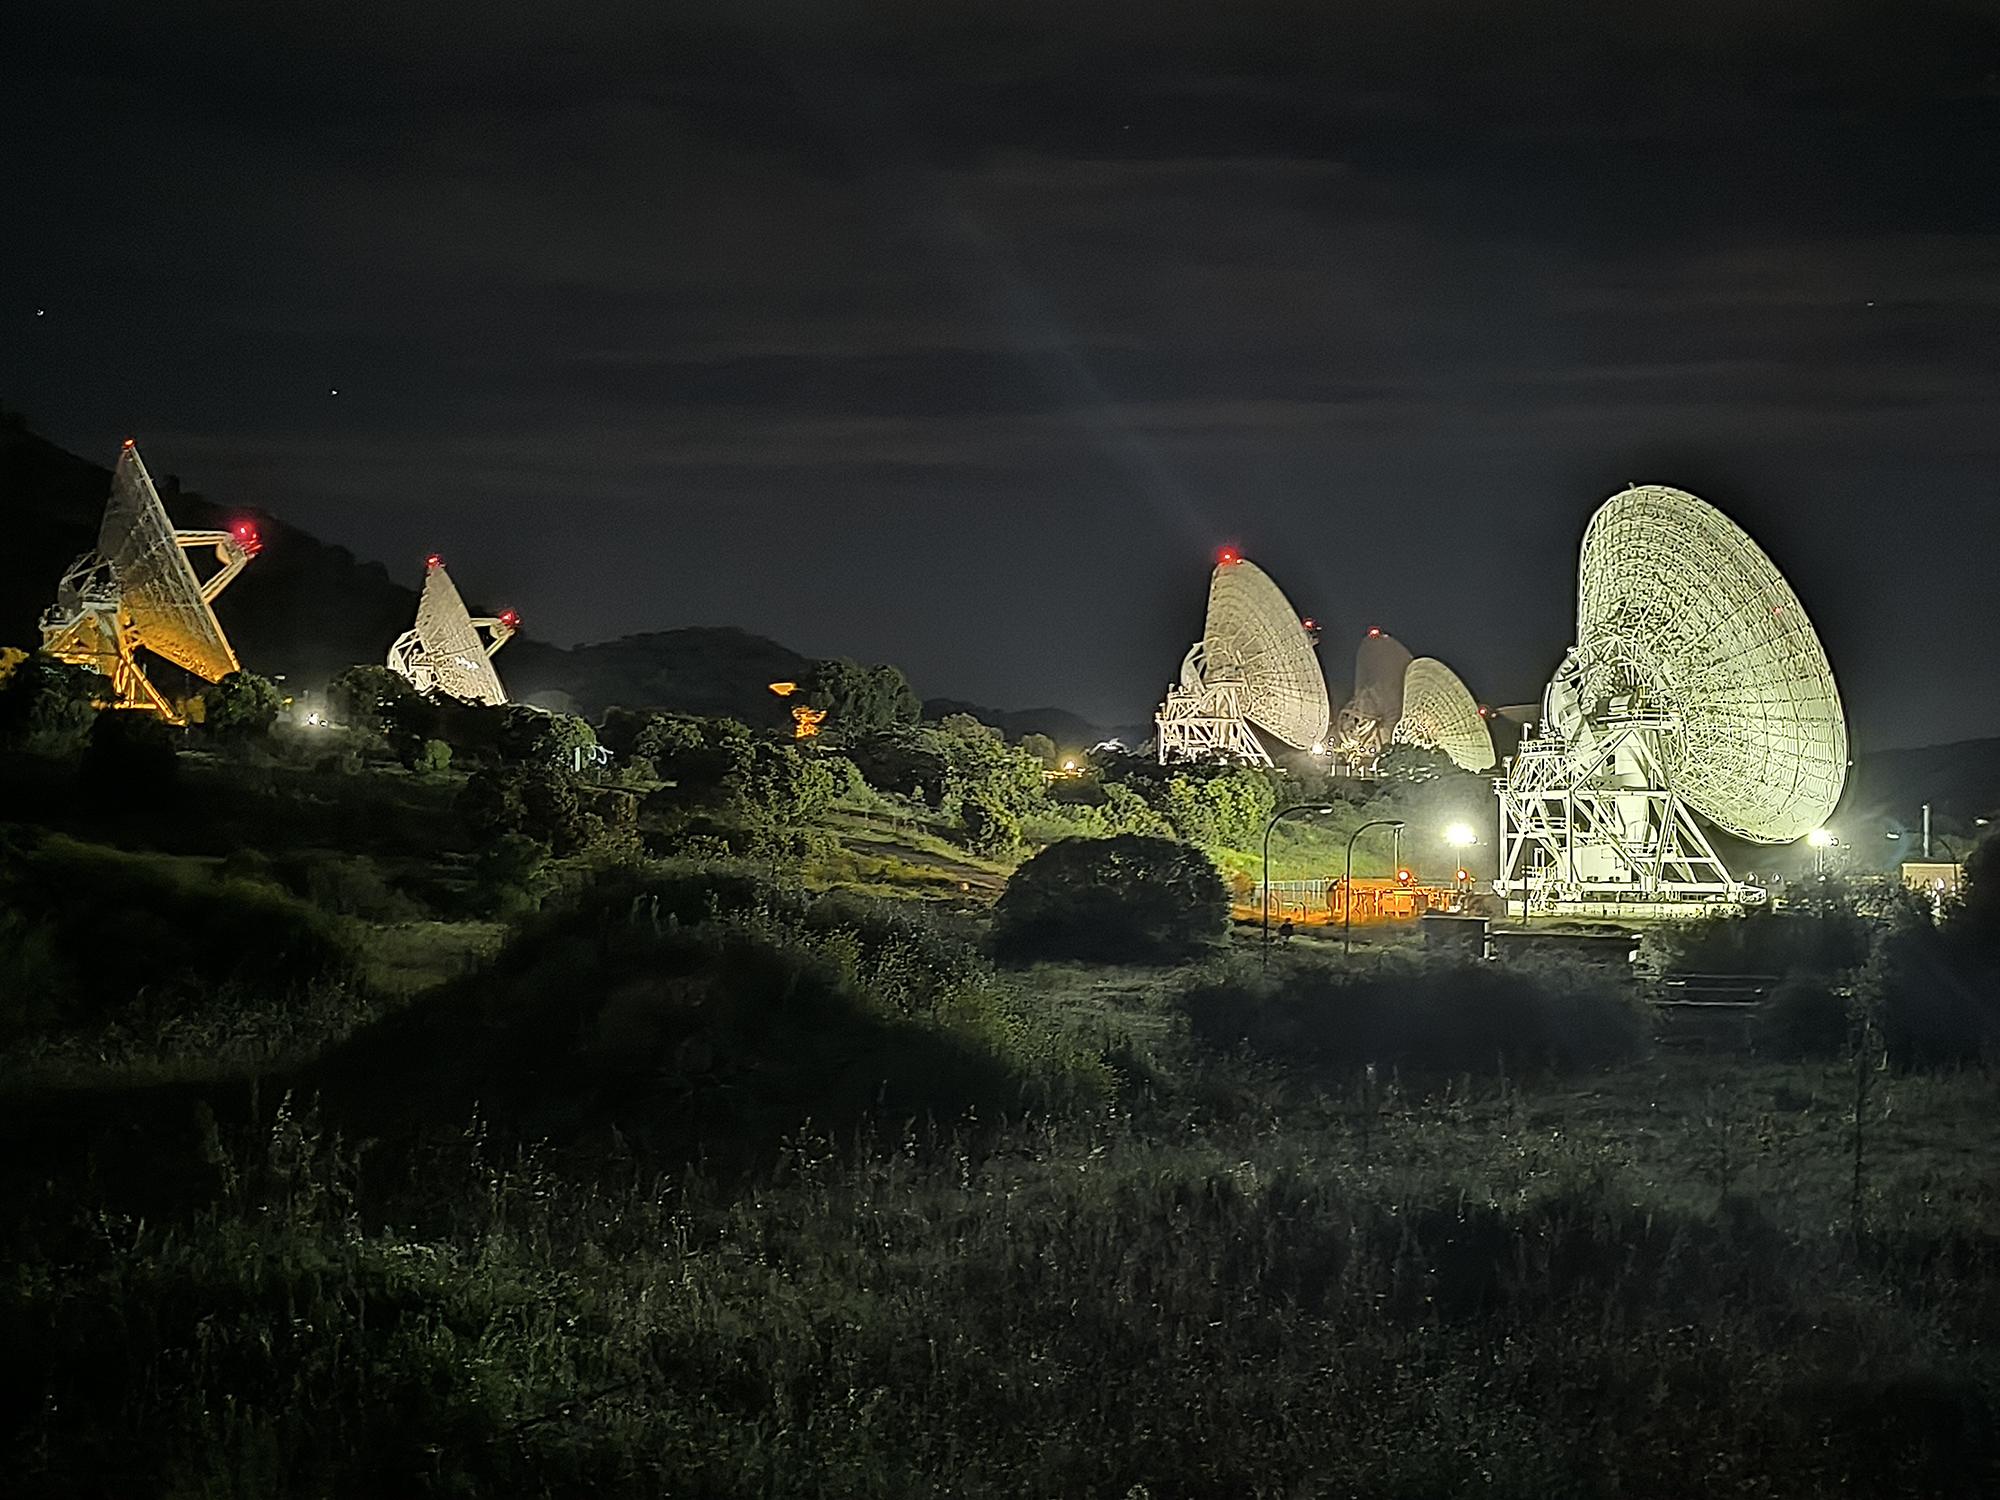 In a nighttime landscape of rolling grasses and trees, 6 large off-white satellites face to the right. Each satellite has bright spotlights near it, but the surrounding area remains mostly dark.